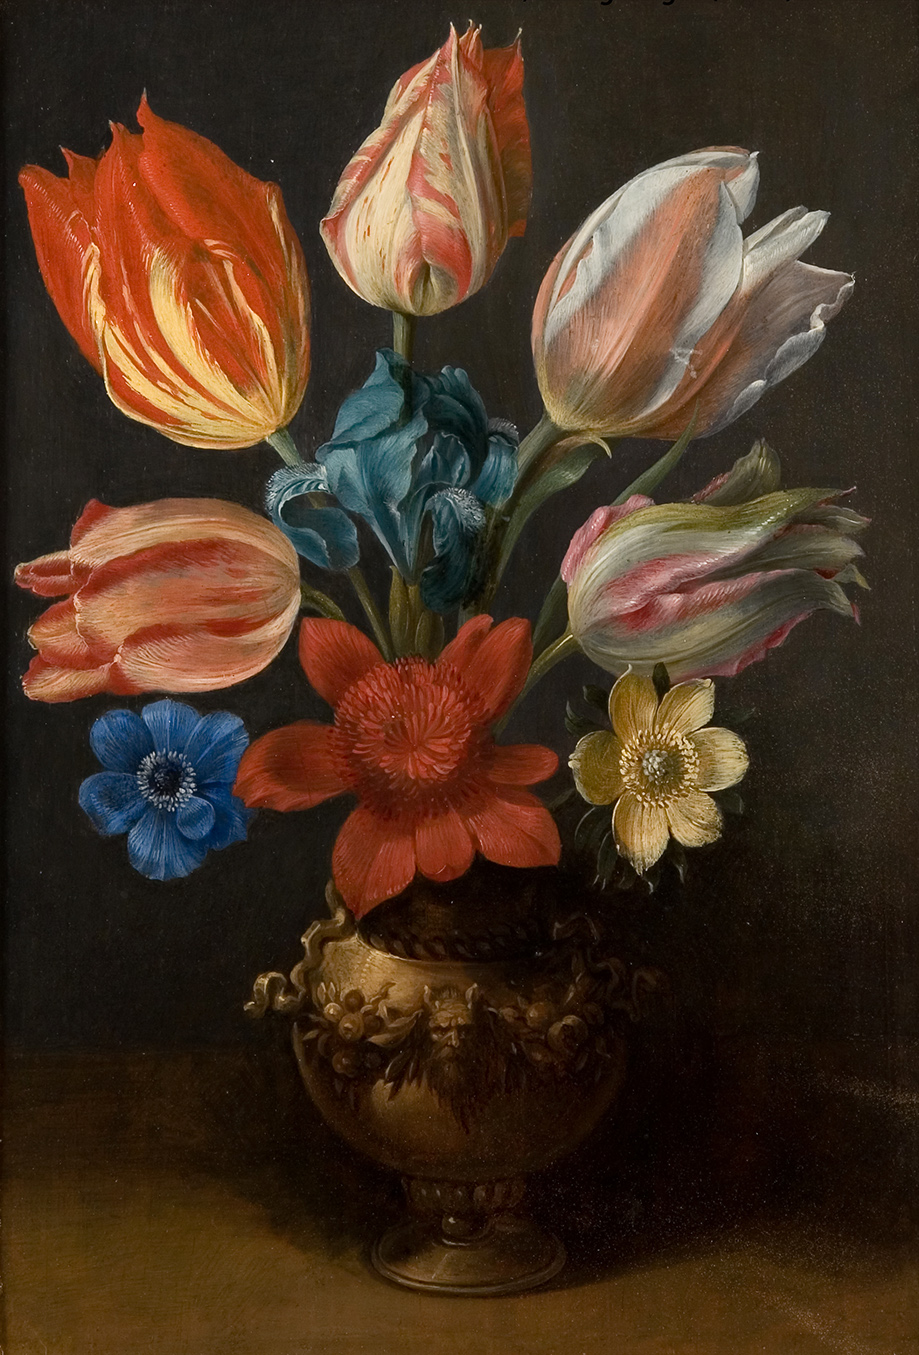 A pottery vase sits in the bottom center of the painting. It has applied sculptural flowers in a ring around the center with a sculpted face of a bearded man in the center. The vase holds five tulips, an iris, and three other flowers. The tulips are mostly oranges and pinks with stripes of yellow and white. The other flowers are blue, red and yellow.